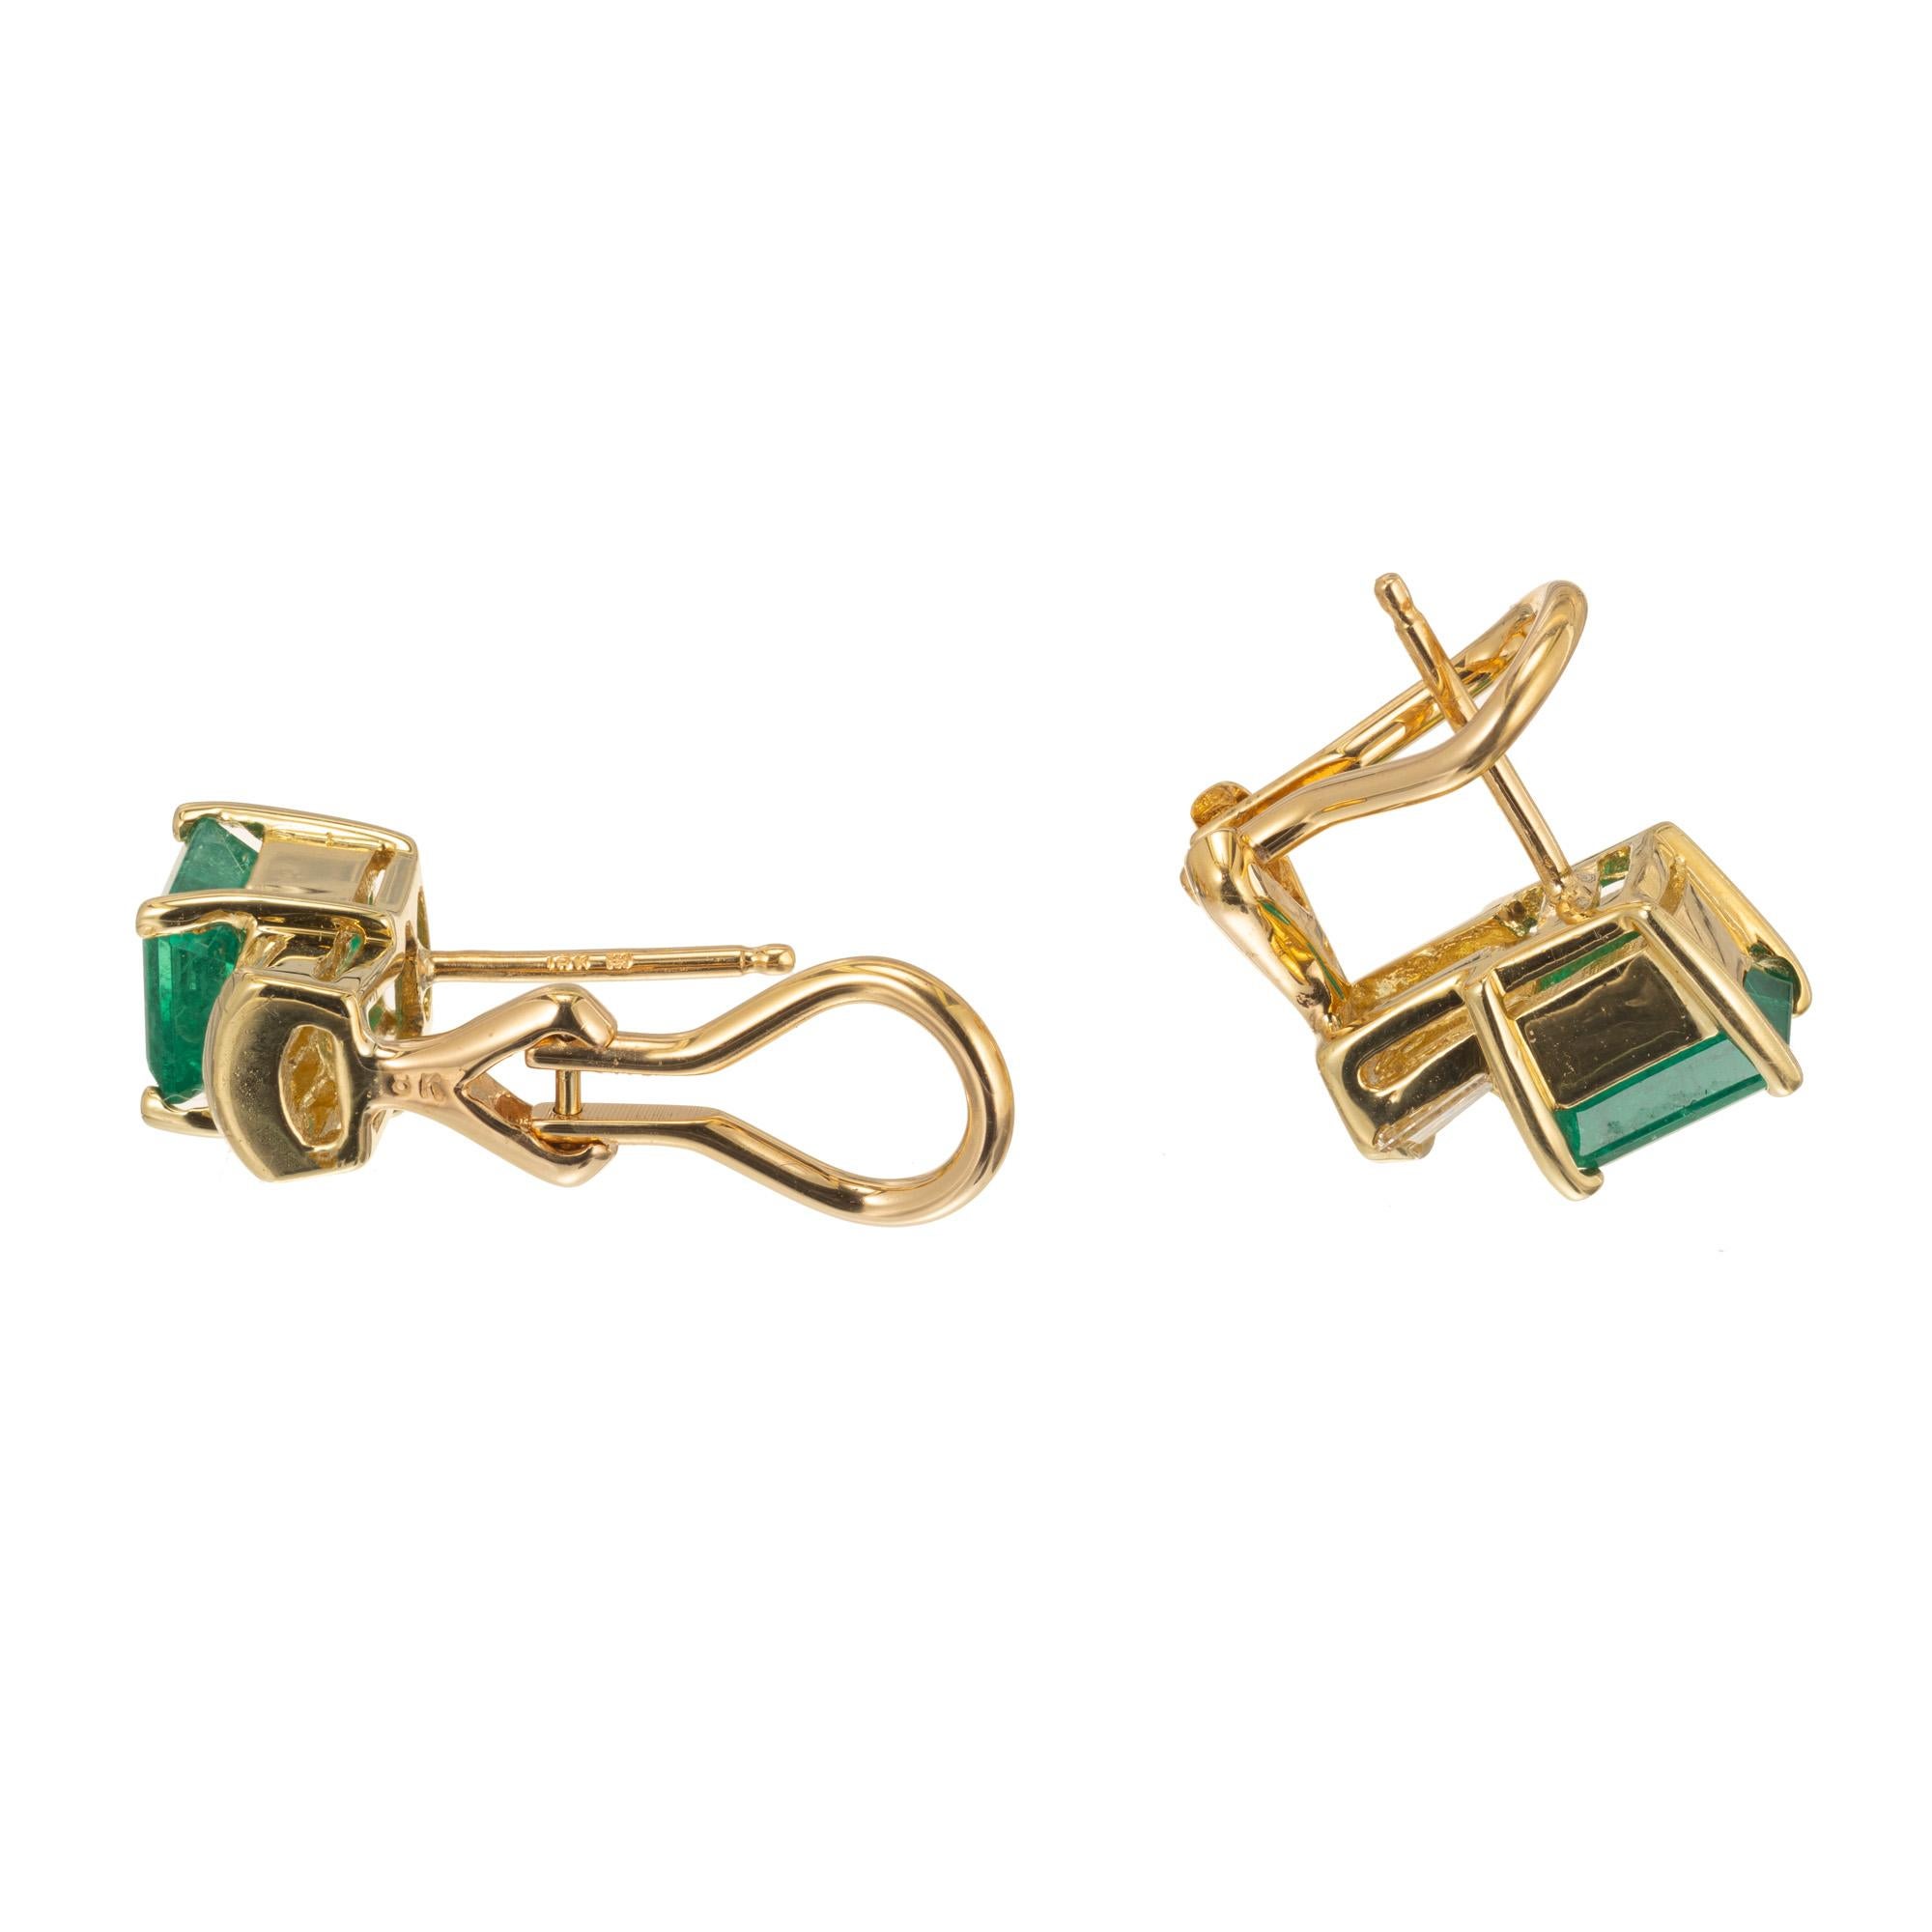 Green natural color Emerald and diamond clip post earrings in 18k yellow gold baskets with eight tapered baguette diamonds.  GIA certified natural color emeralds. GIA Certificate # 1162969629

2 bright green Emerald cut Emeralds, approx. total